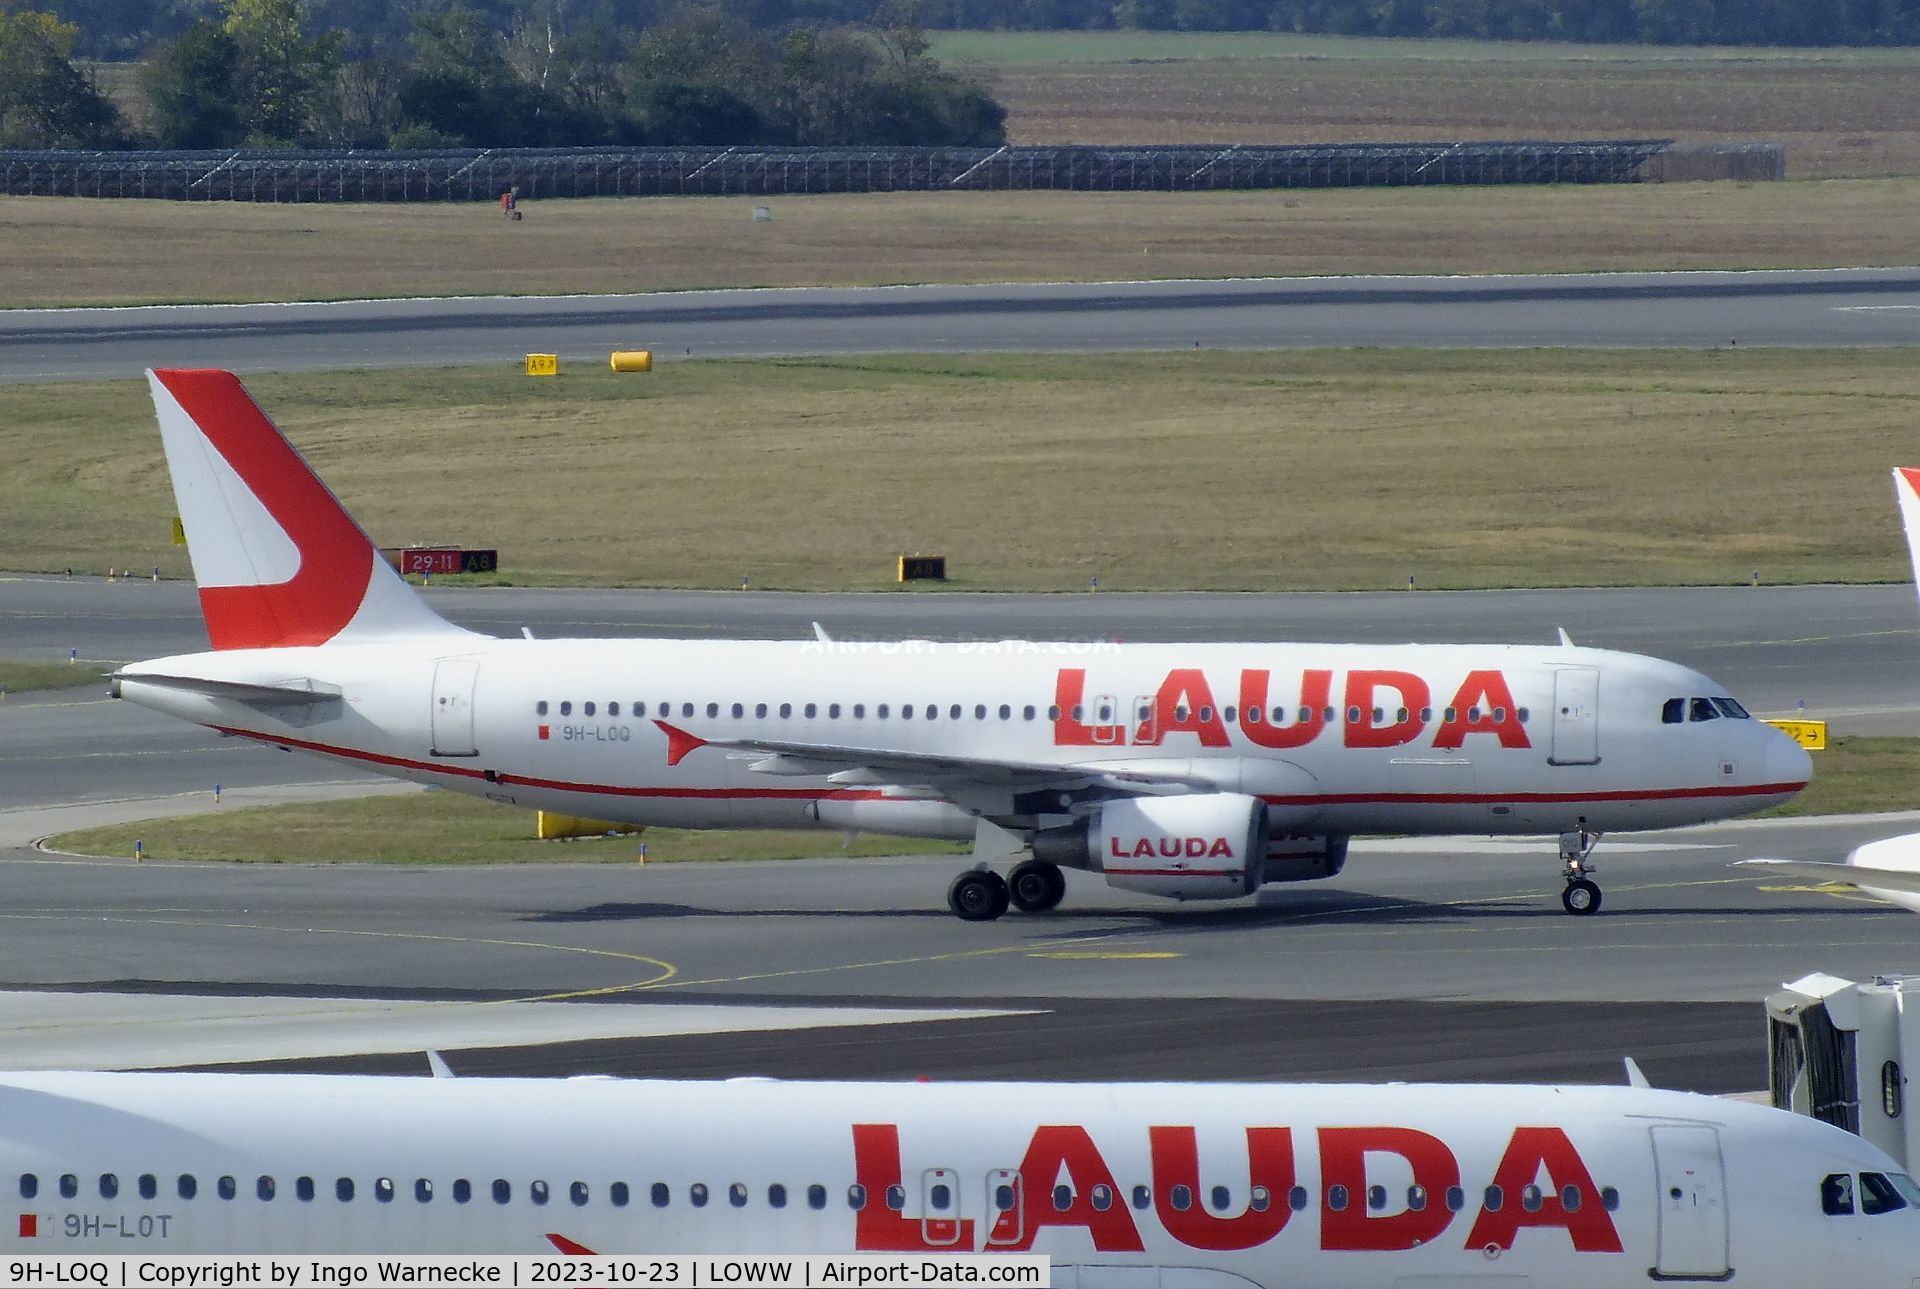 9H-LOQ, 2007 Airbus A320-214 C/N 3131, Airbus A320-214 of Lauda Europe at Wien-Schwechat airport